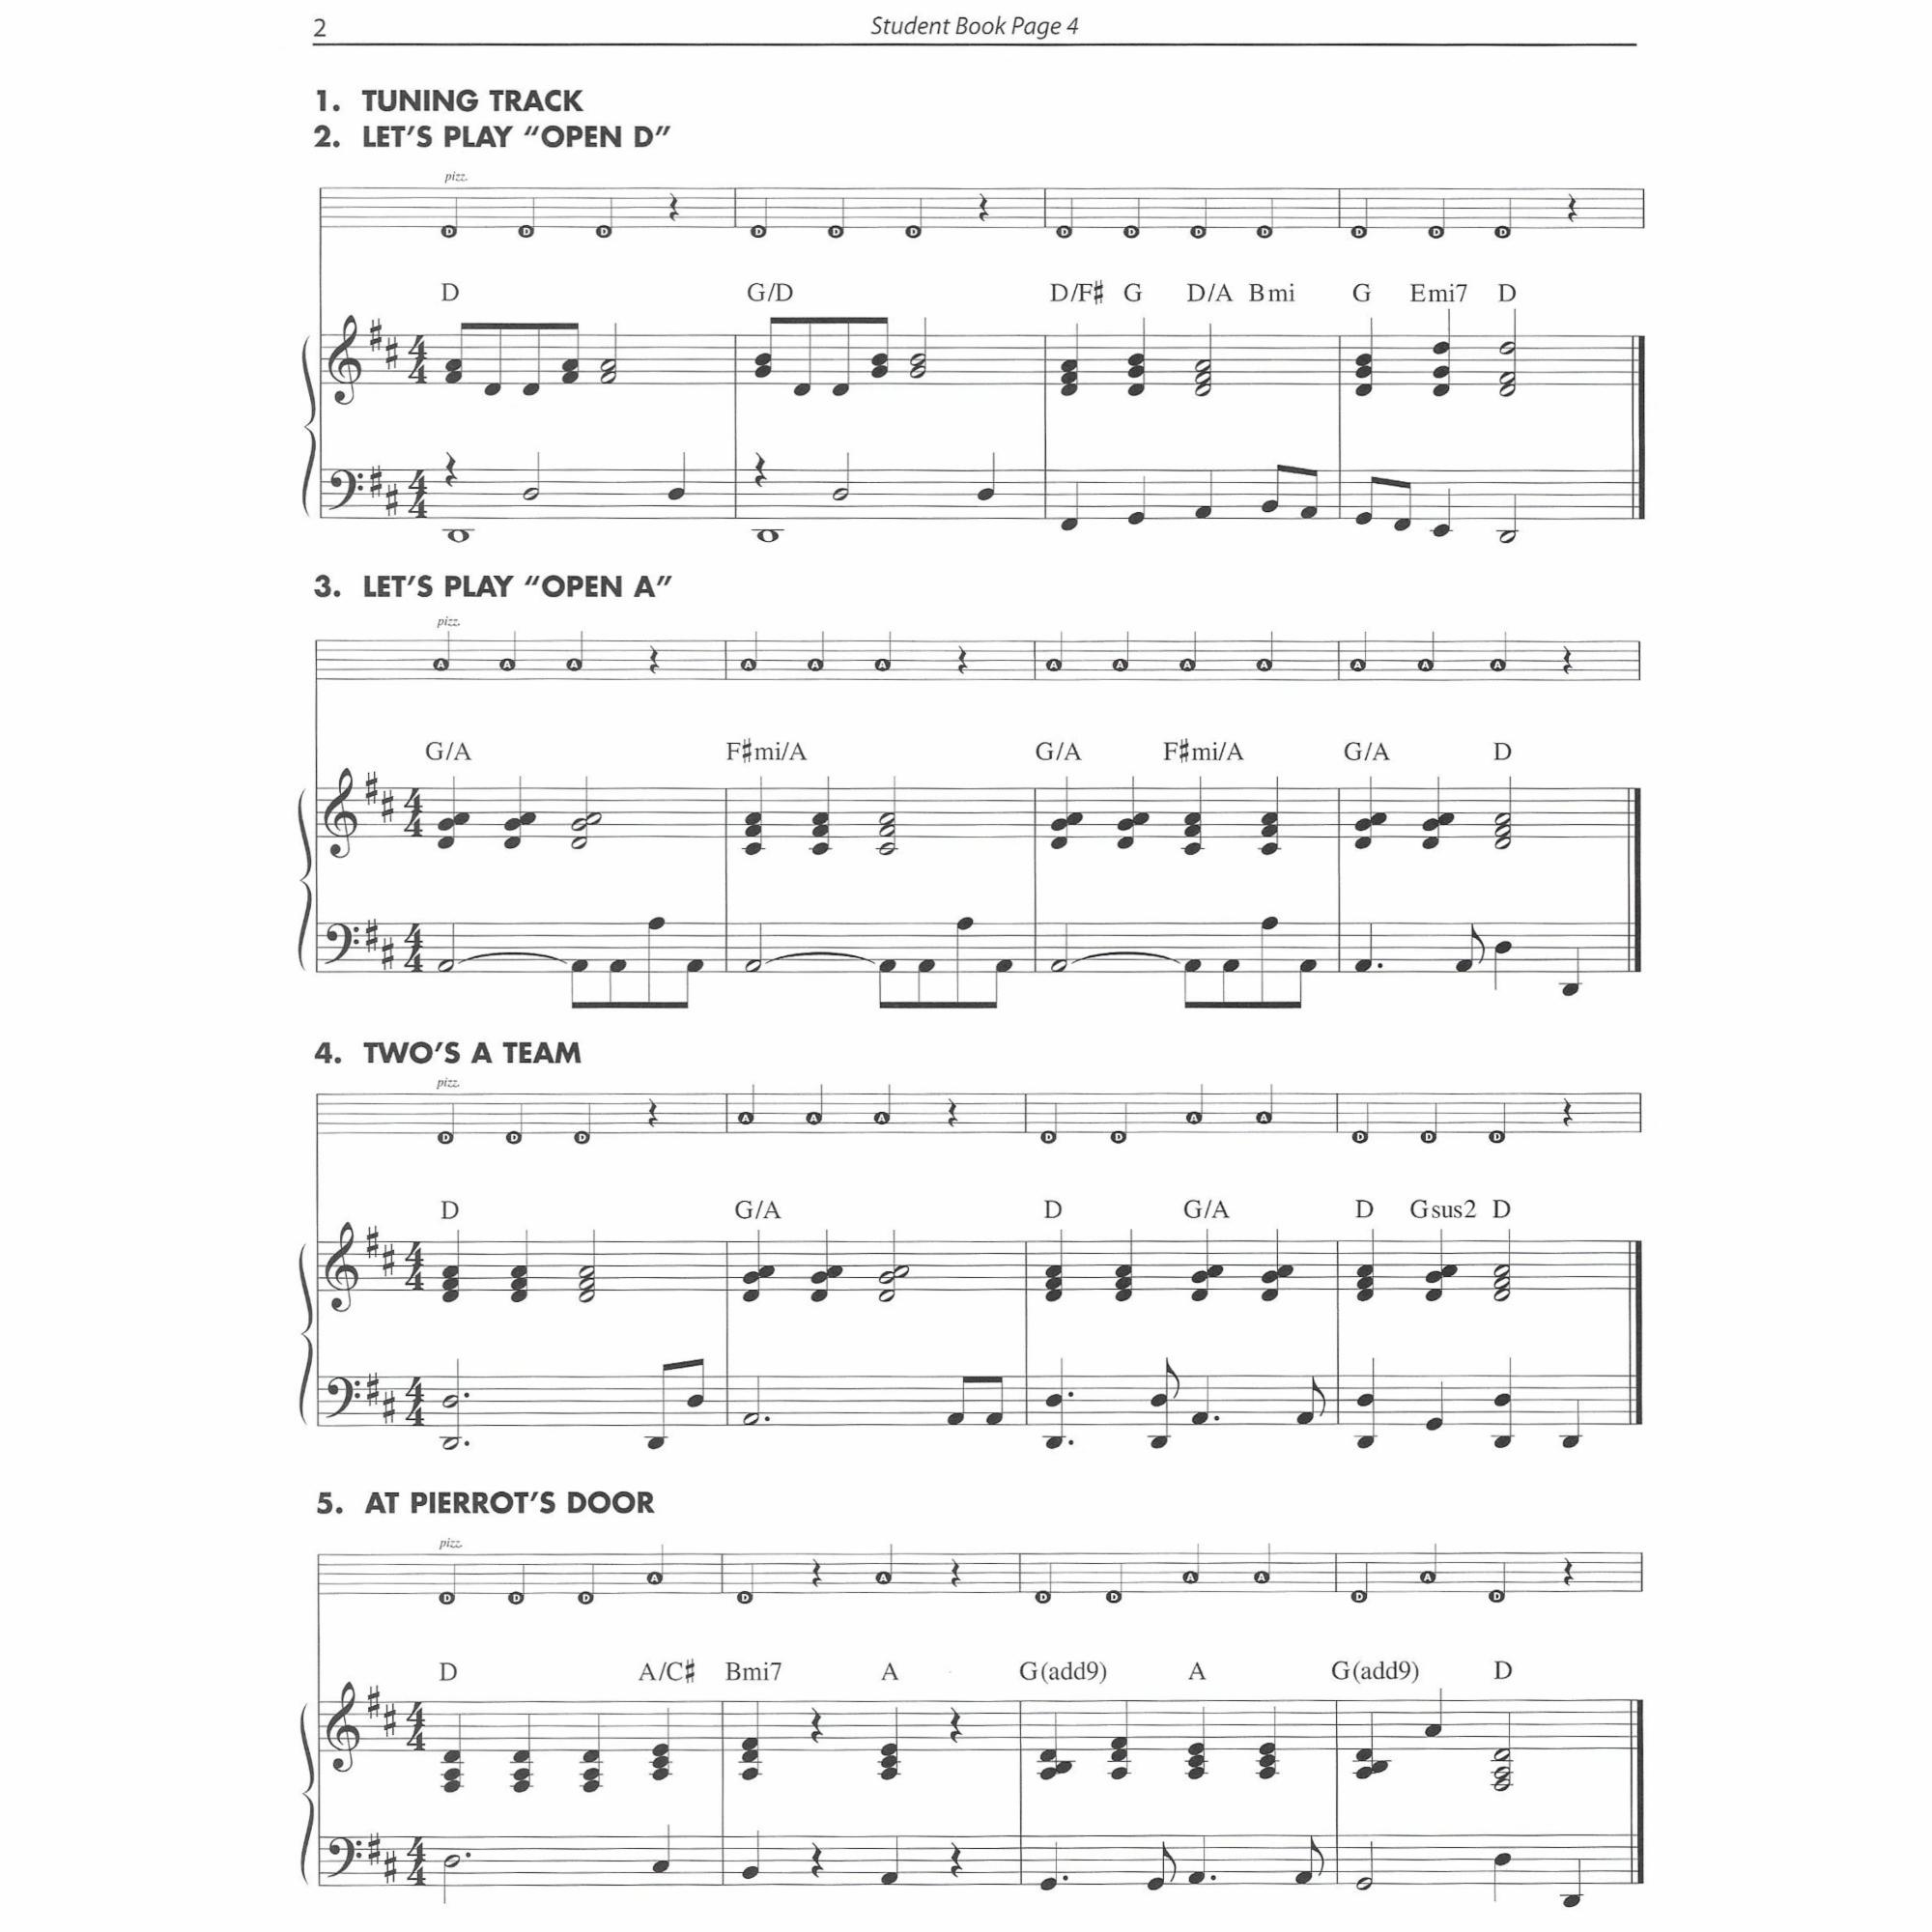 Sample: Piano Acc. to Pg. 4